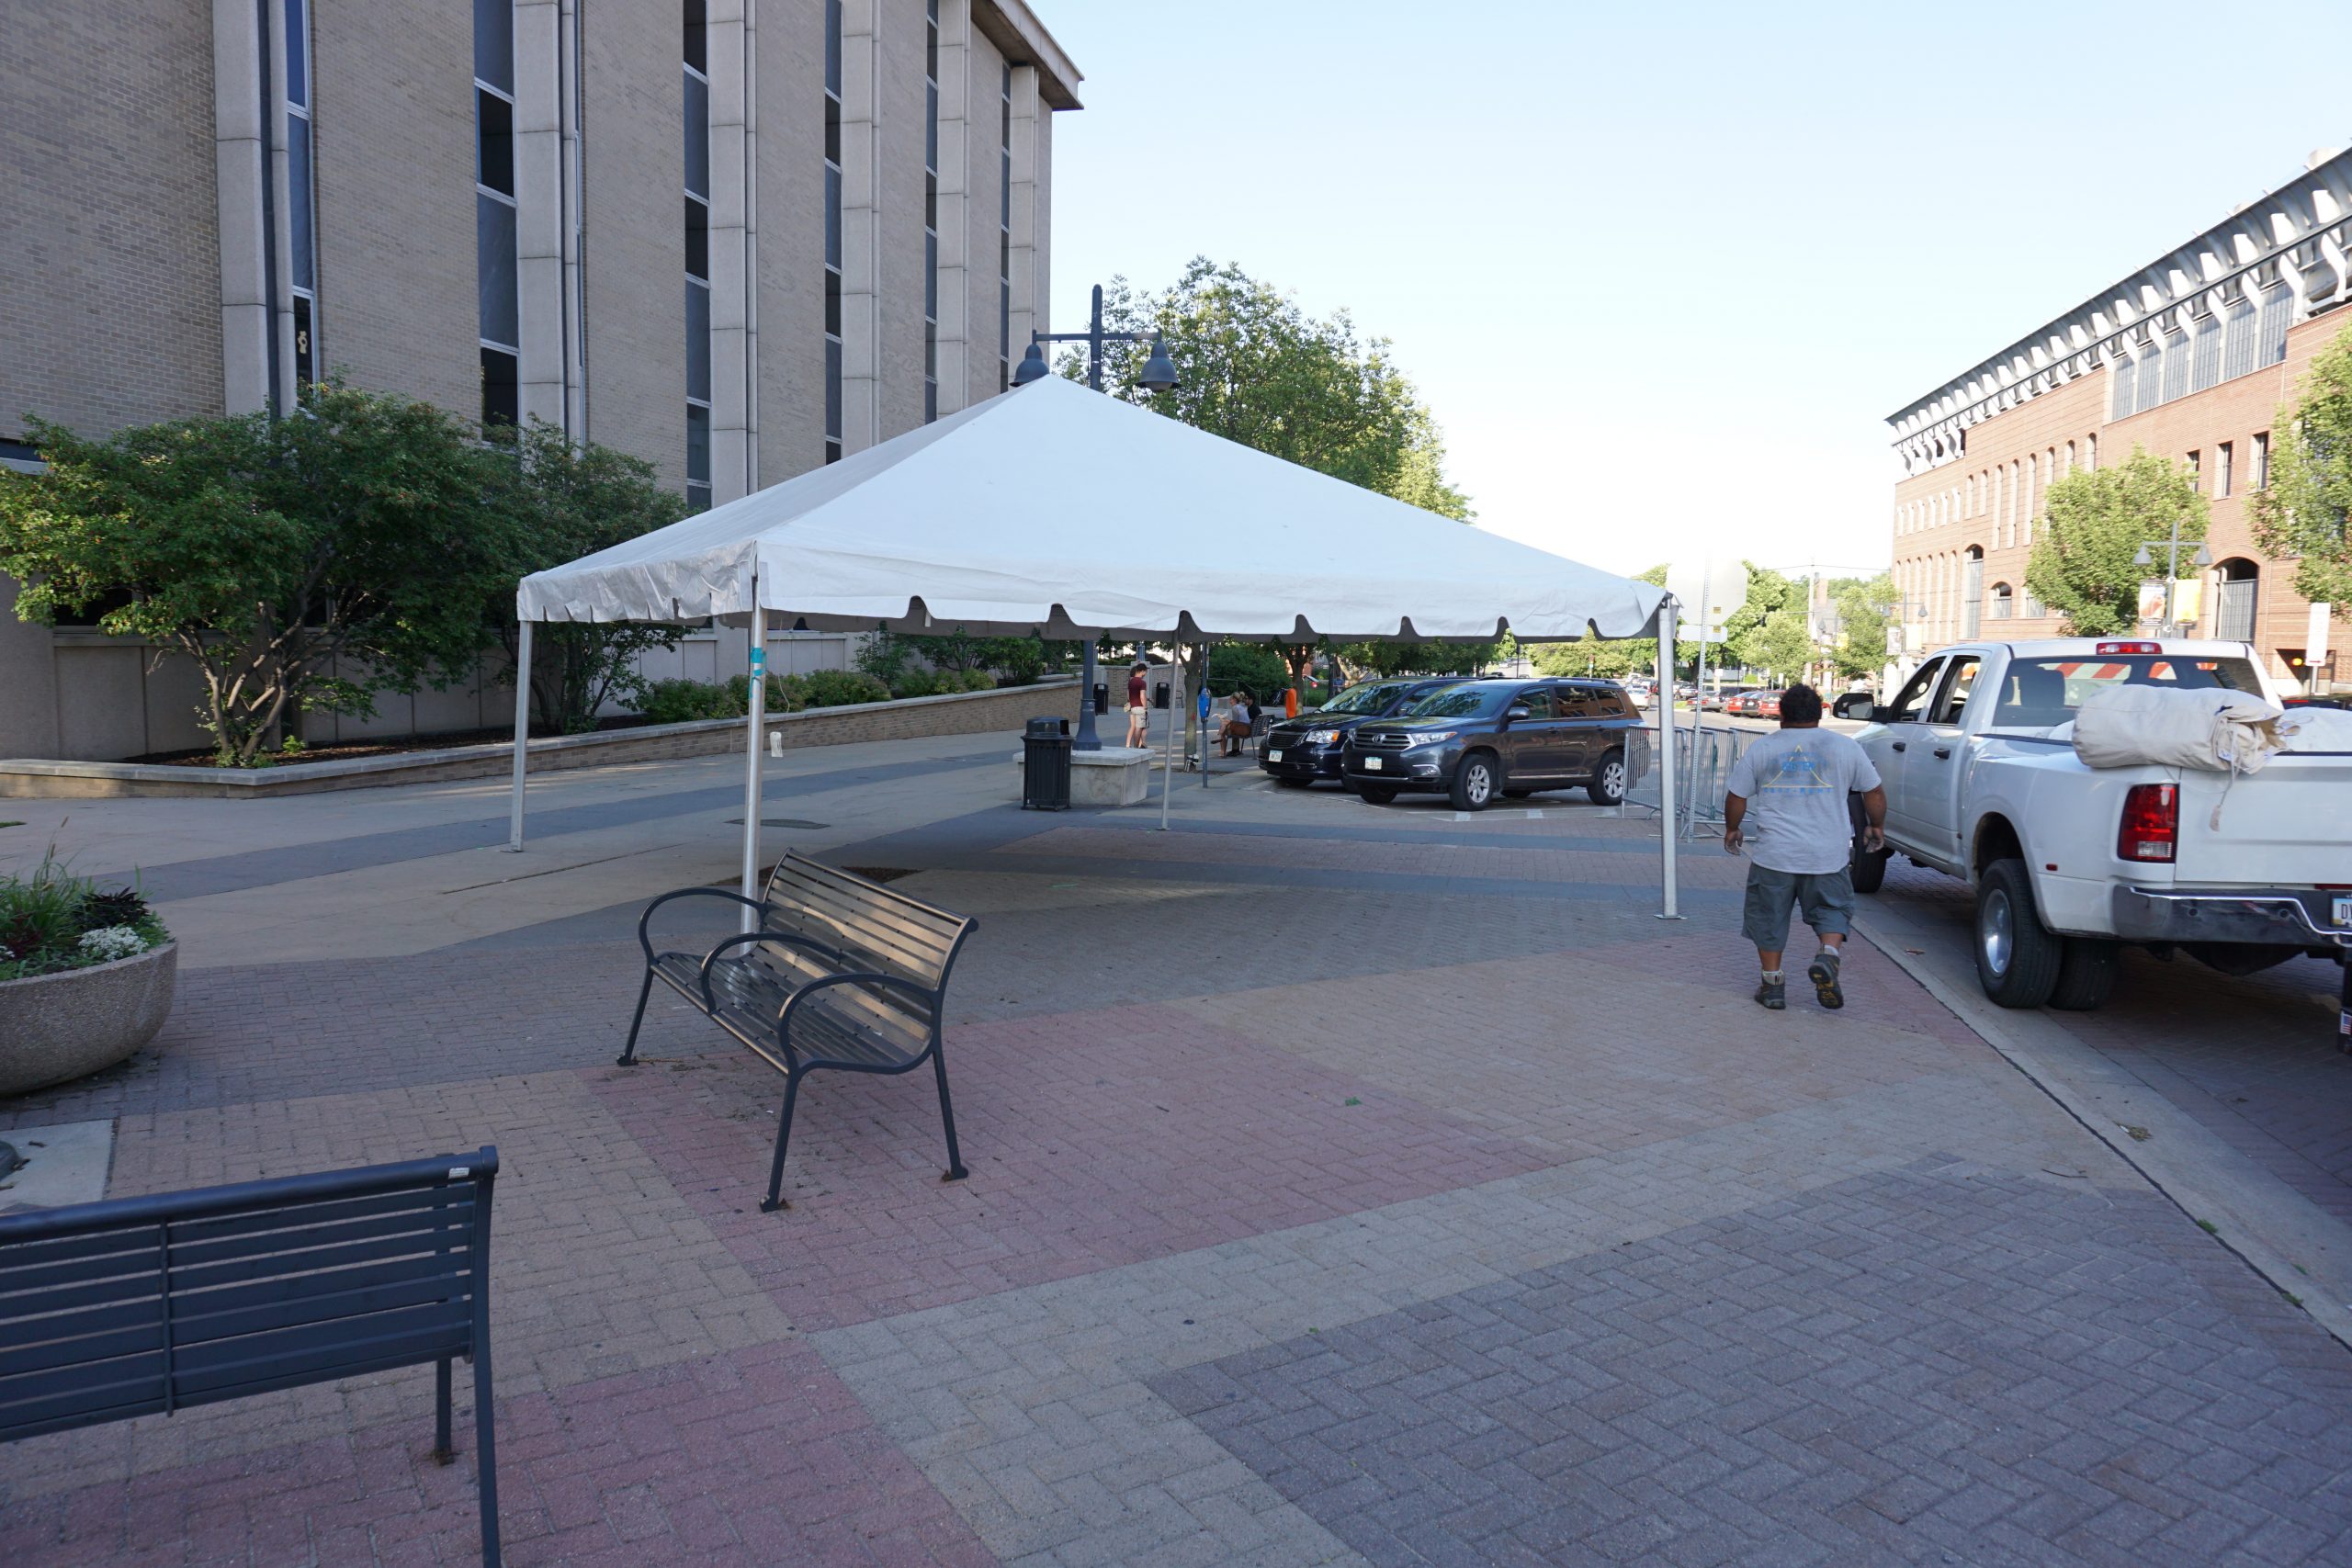 20' x 20' frame tent just setup (no weights yet) at the 2016 Iowa Arts Fest